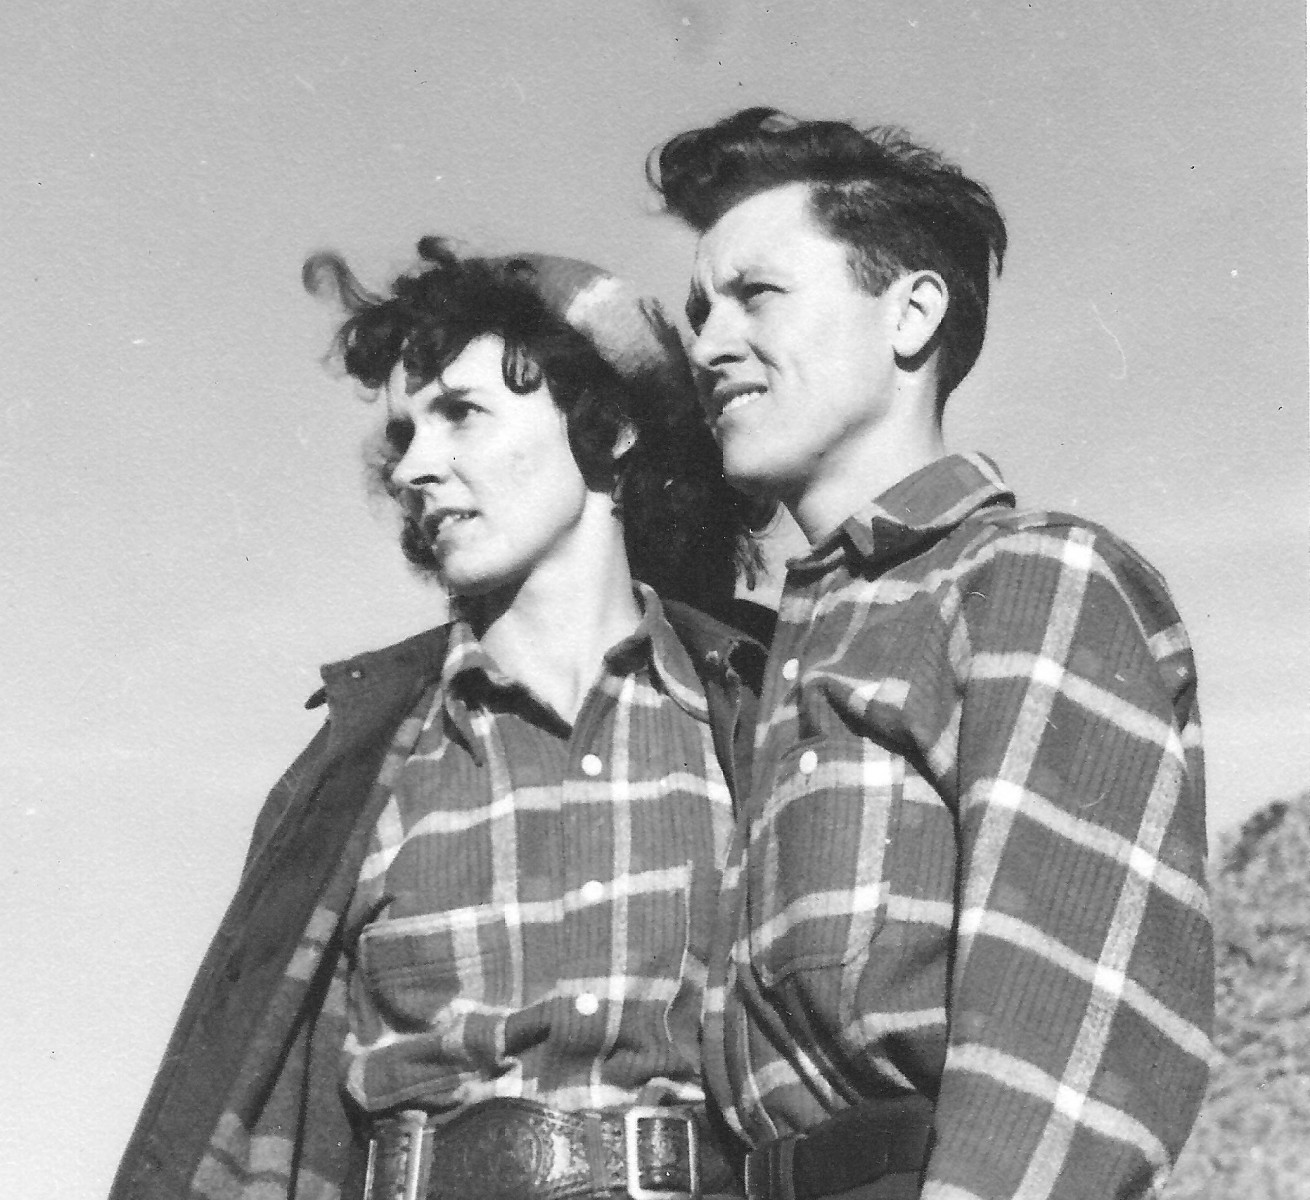 J. Paul Taylor and Mary Daniels Taylor in 1946.